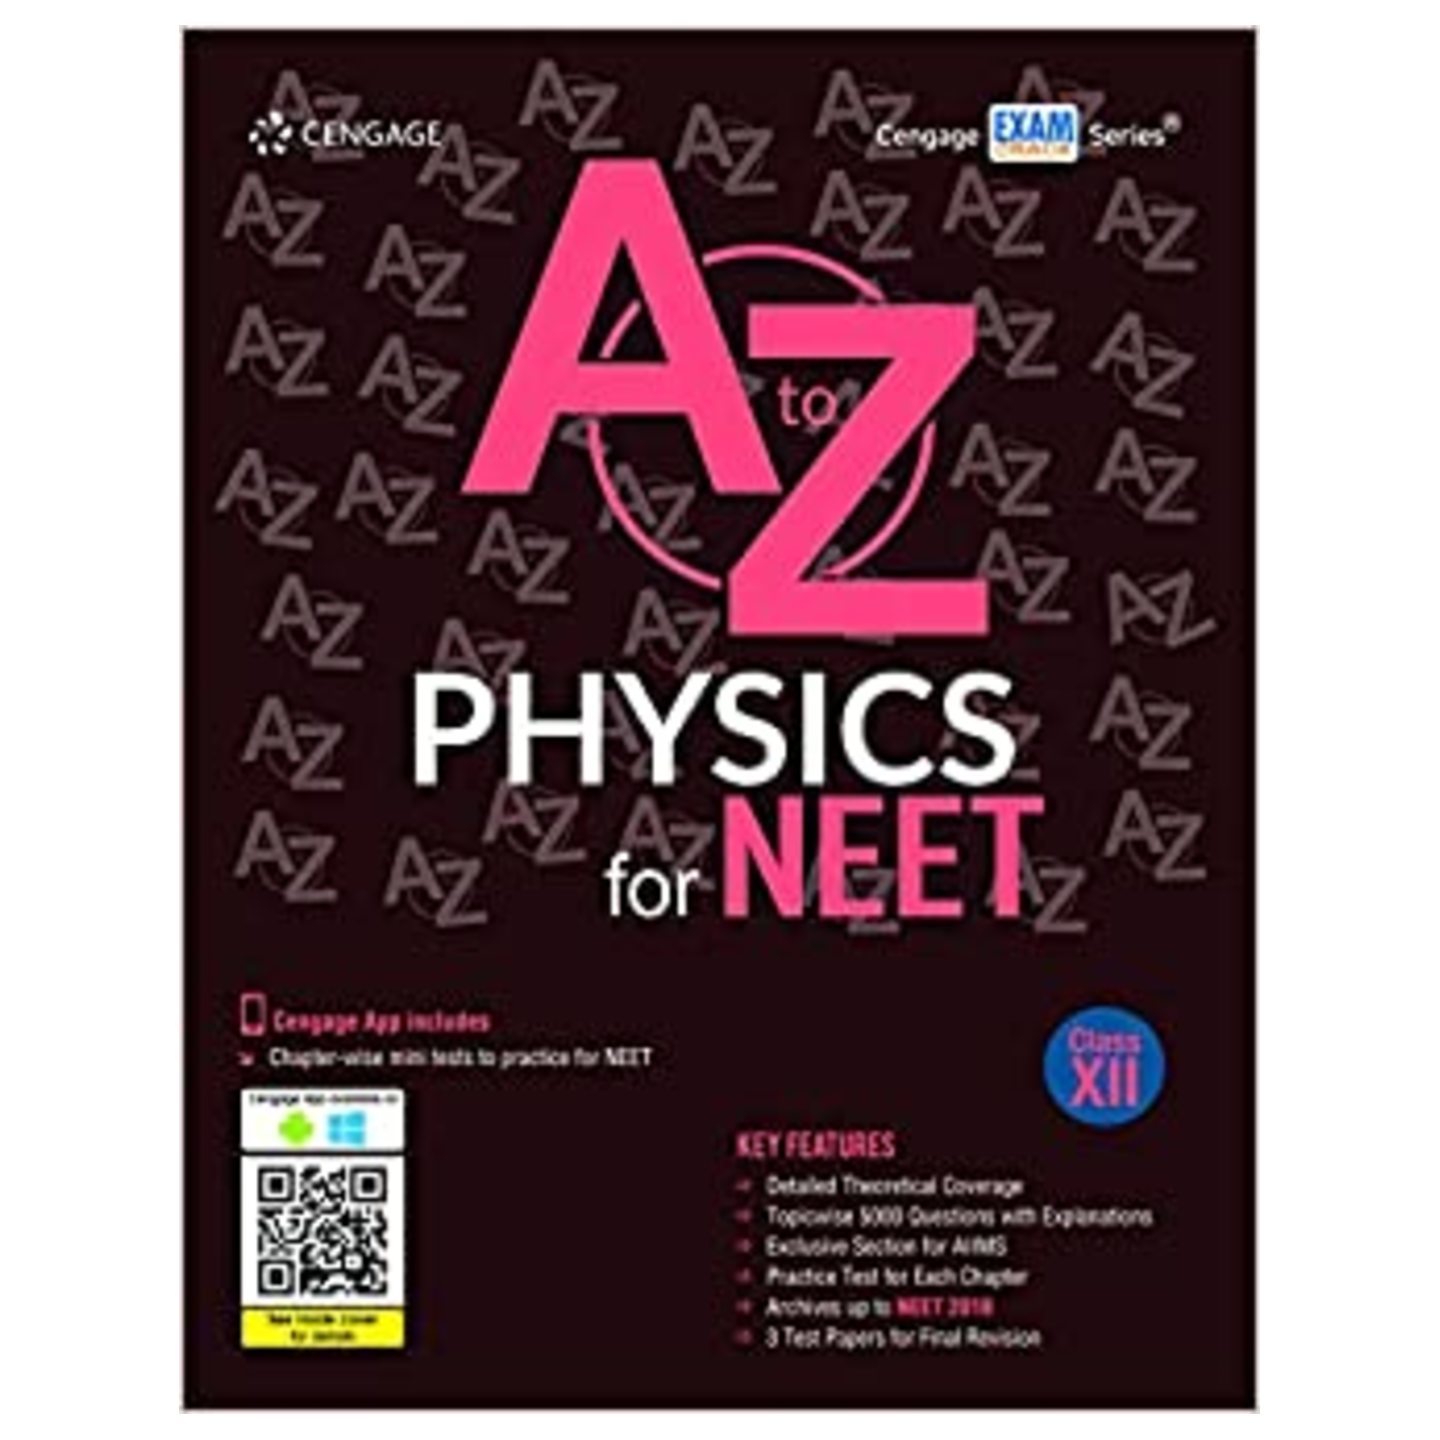 CENGAGE A to Z Physics for NEET Class 12